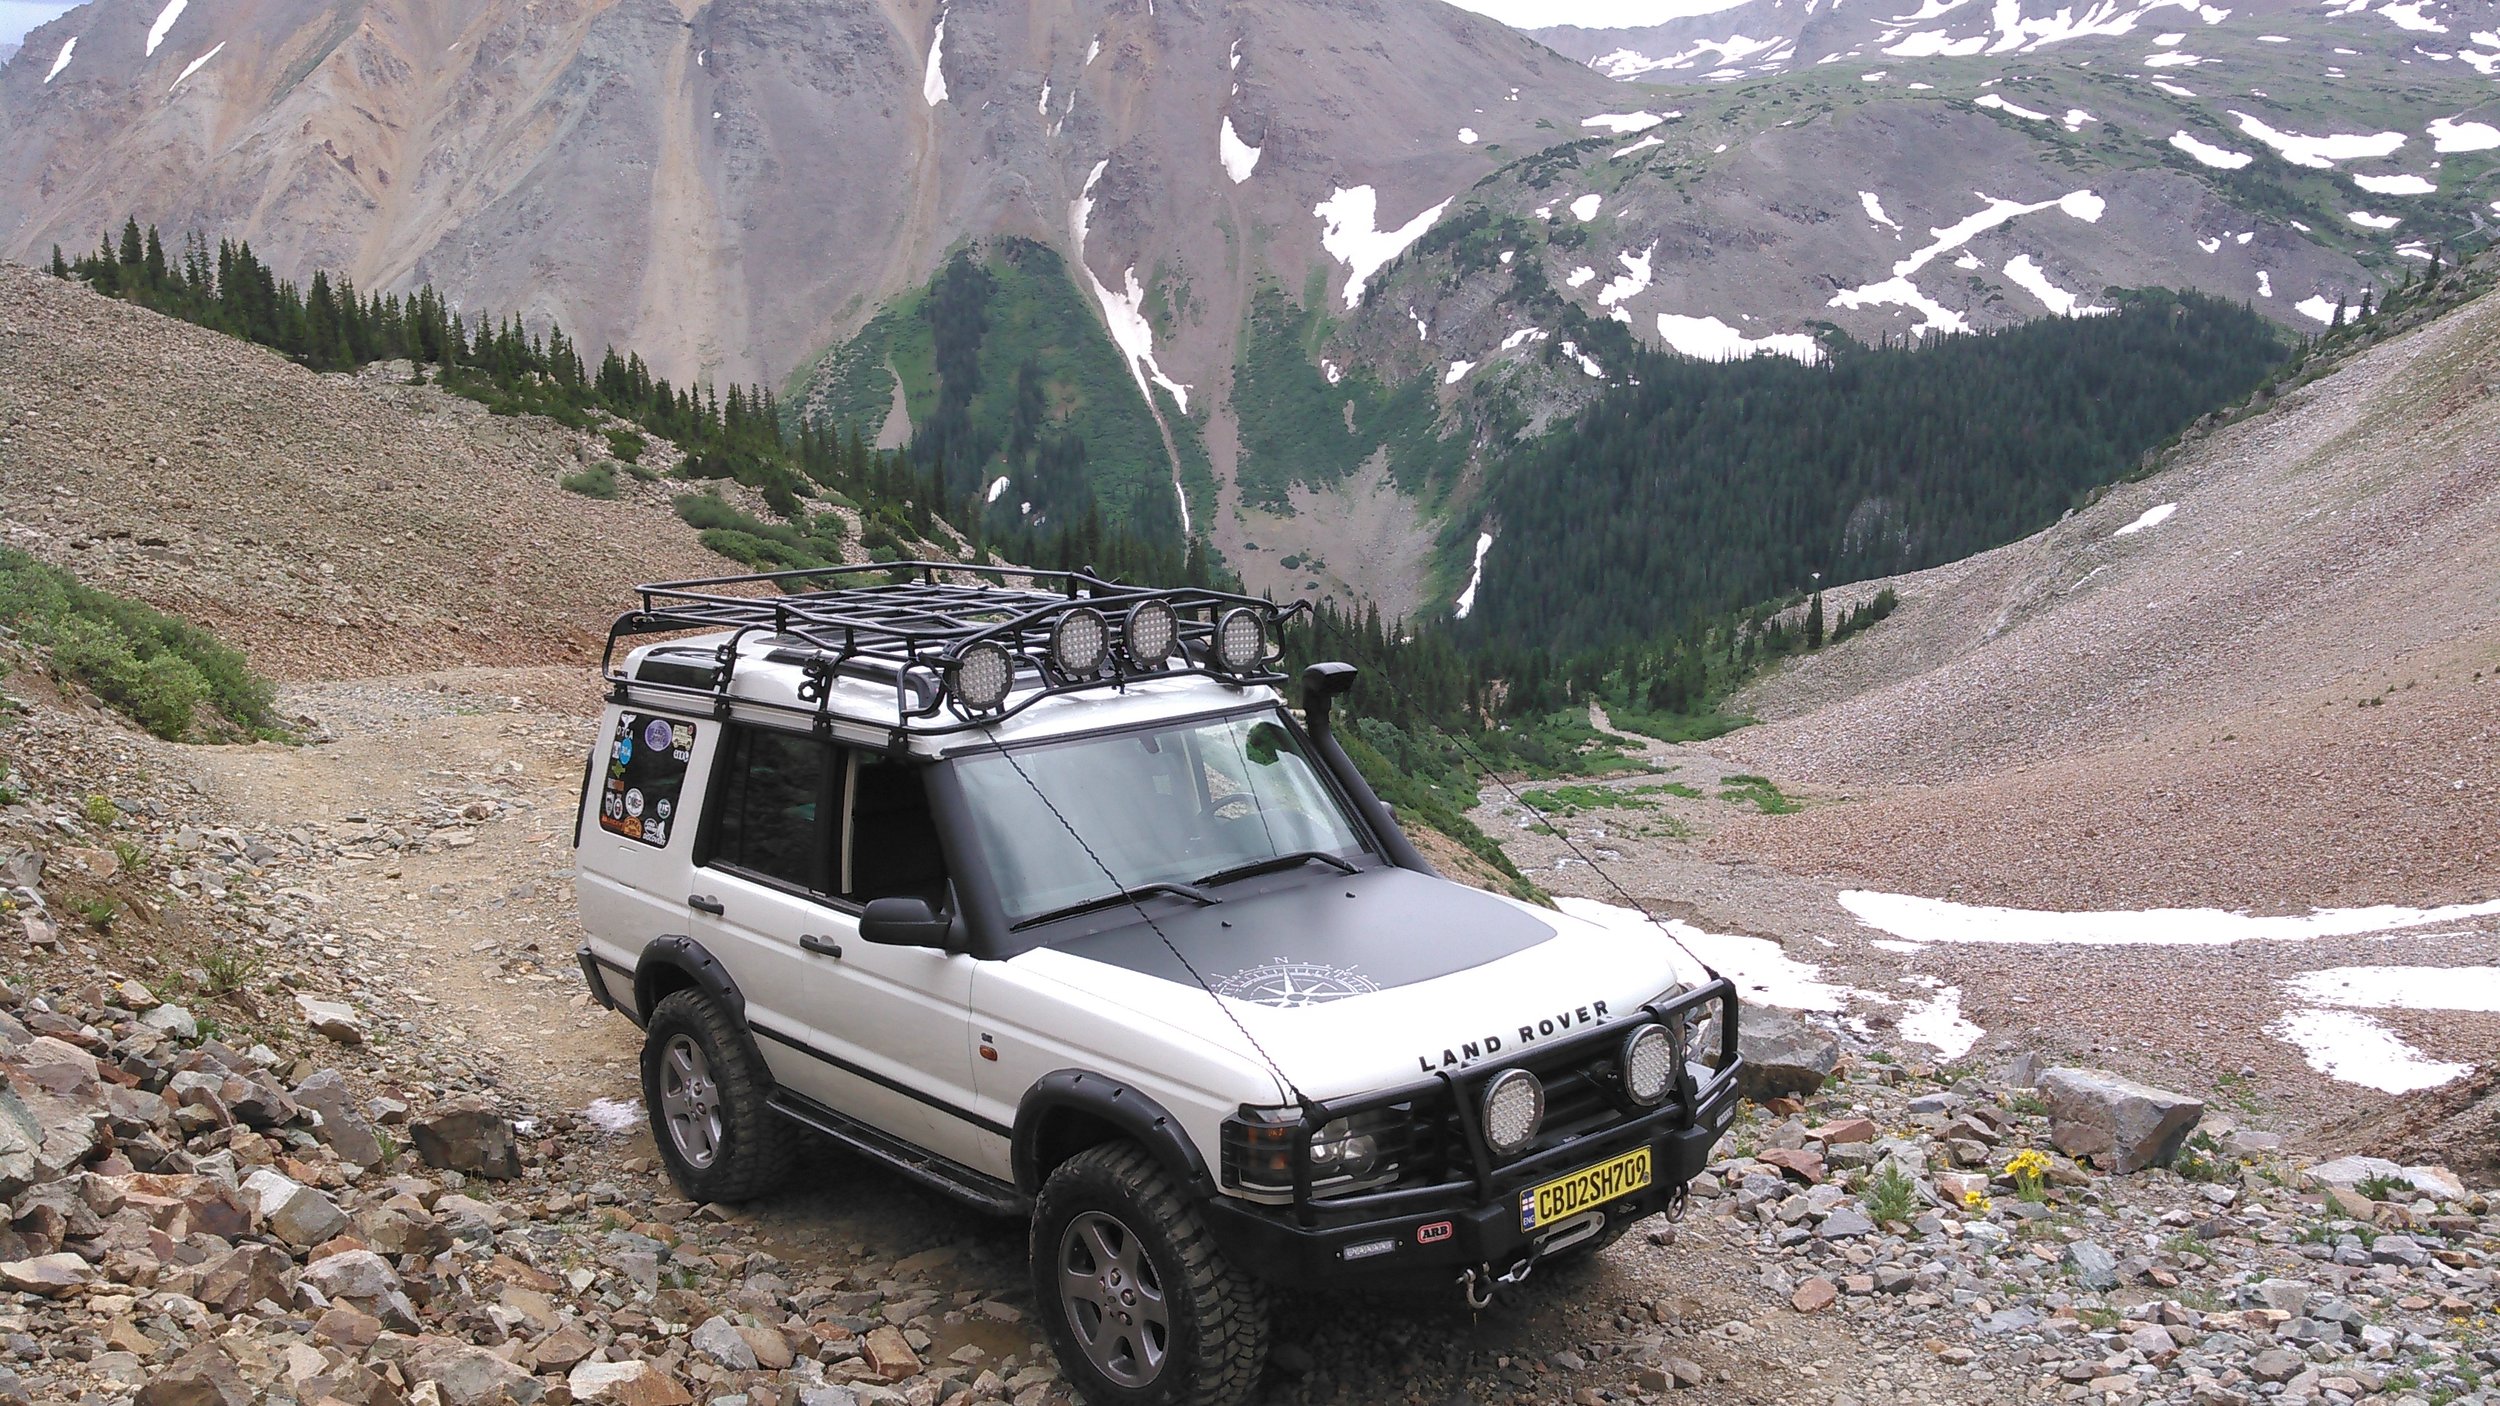 LAND ROVER - DISCOVERY 2 - TELLURIDE.jpg